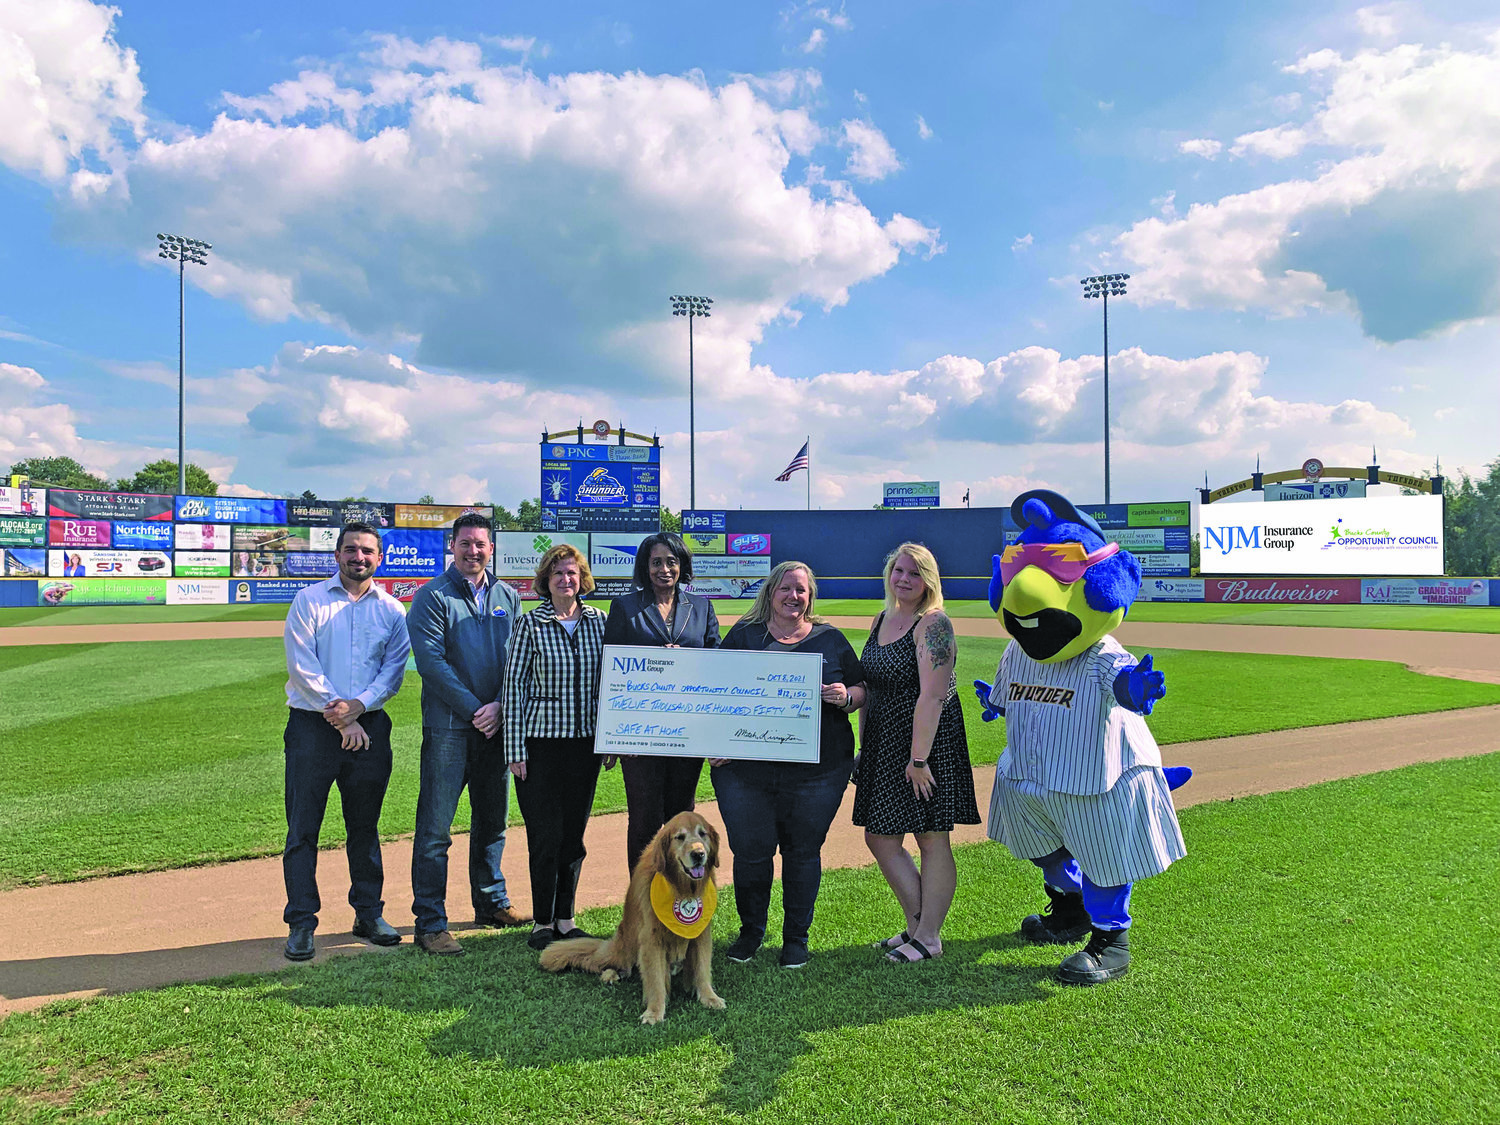 From left are Jeff Richardson (NJM community outreach & events coordinator), Jeff Hurley (Trenton Thunder’s general manager & COO), Pat Hartpence (NJM corporate giving officer), Linda Coles (NJM’s media relations manager), Erin Lukoss (Bucks County Opportunity Council’s CEO/executive director), Connie McGarvey (Bucks County Opportunity Council’s PR & communications coordinator), Boomer. Front and center: Rookie.